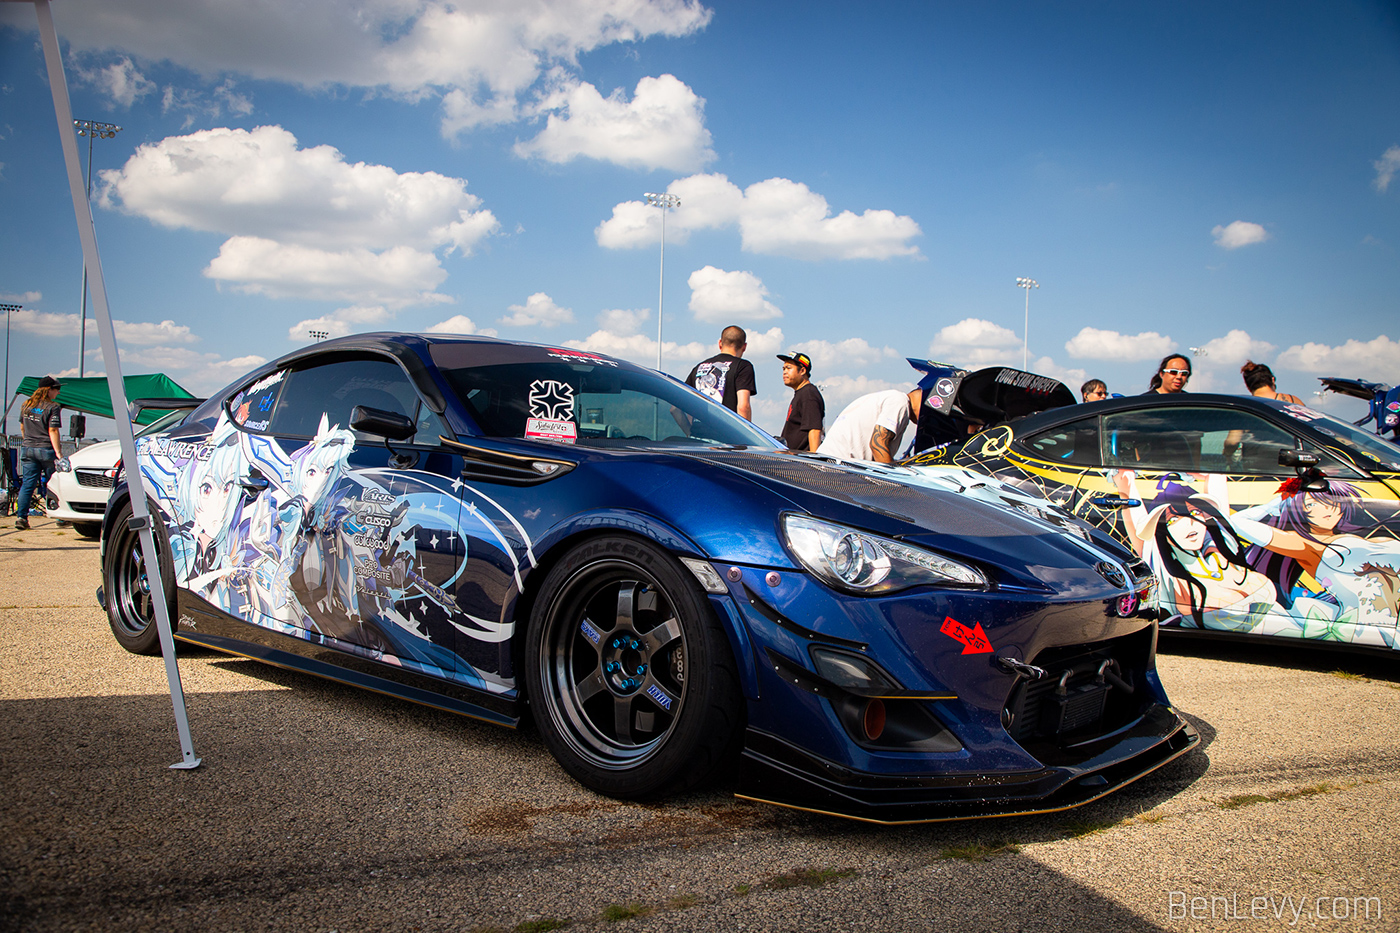 Winner of Best BRZ / FR-S at Subiefest Midwest 2021